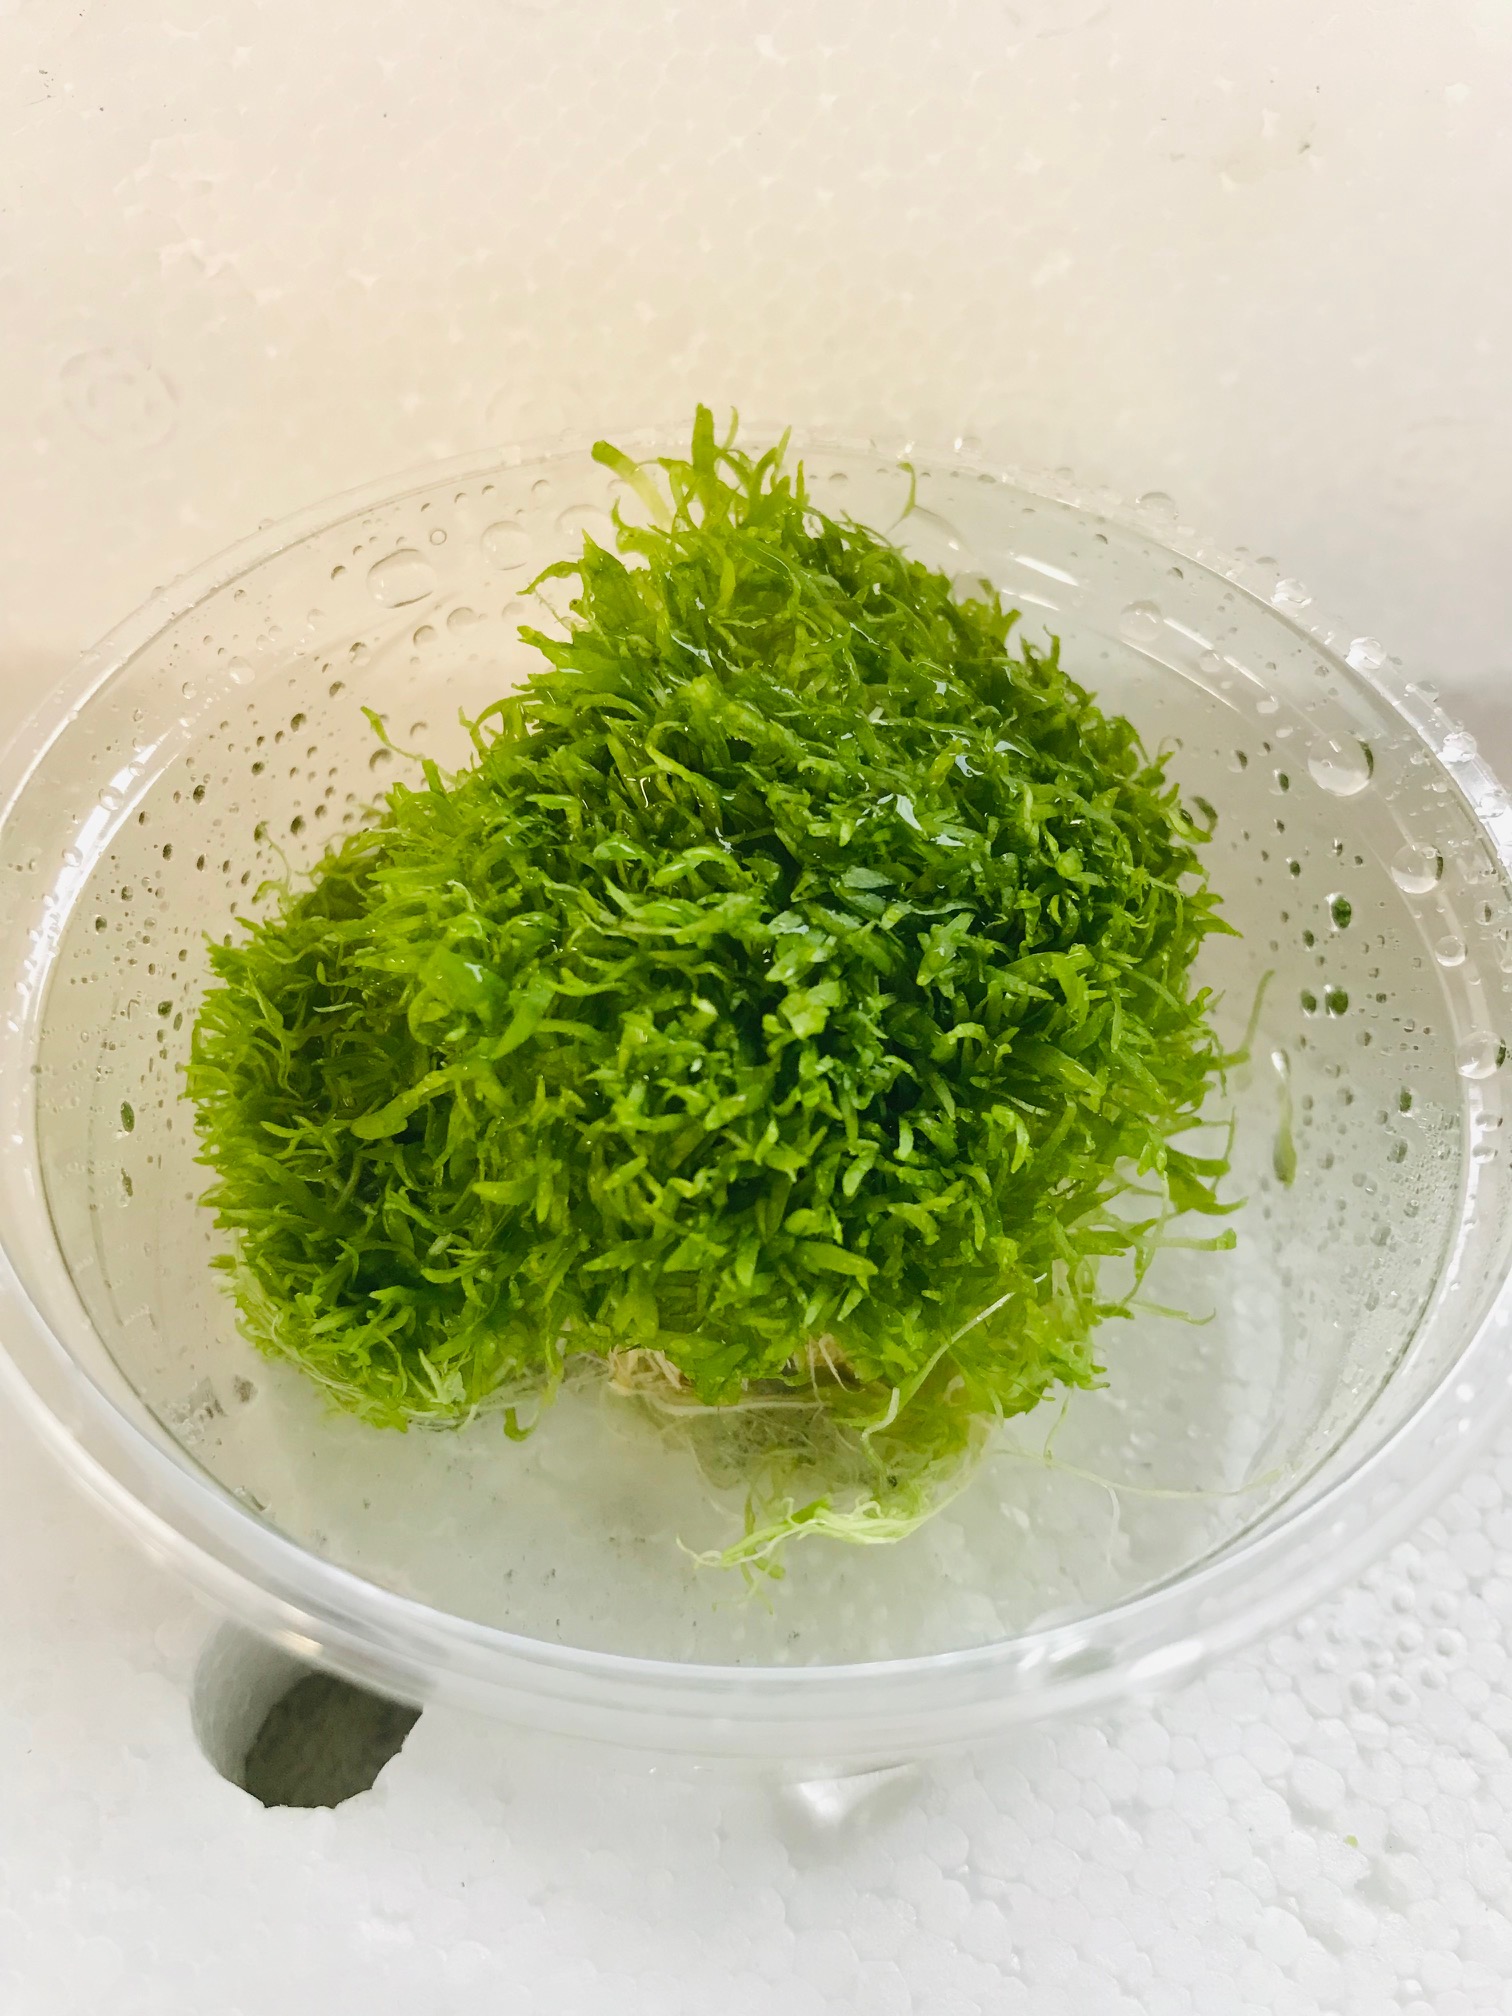 Utricularia Moss in Cup